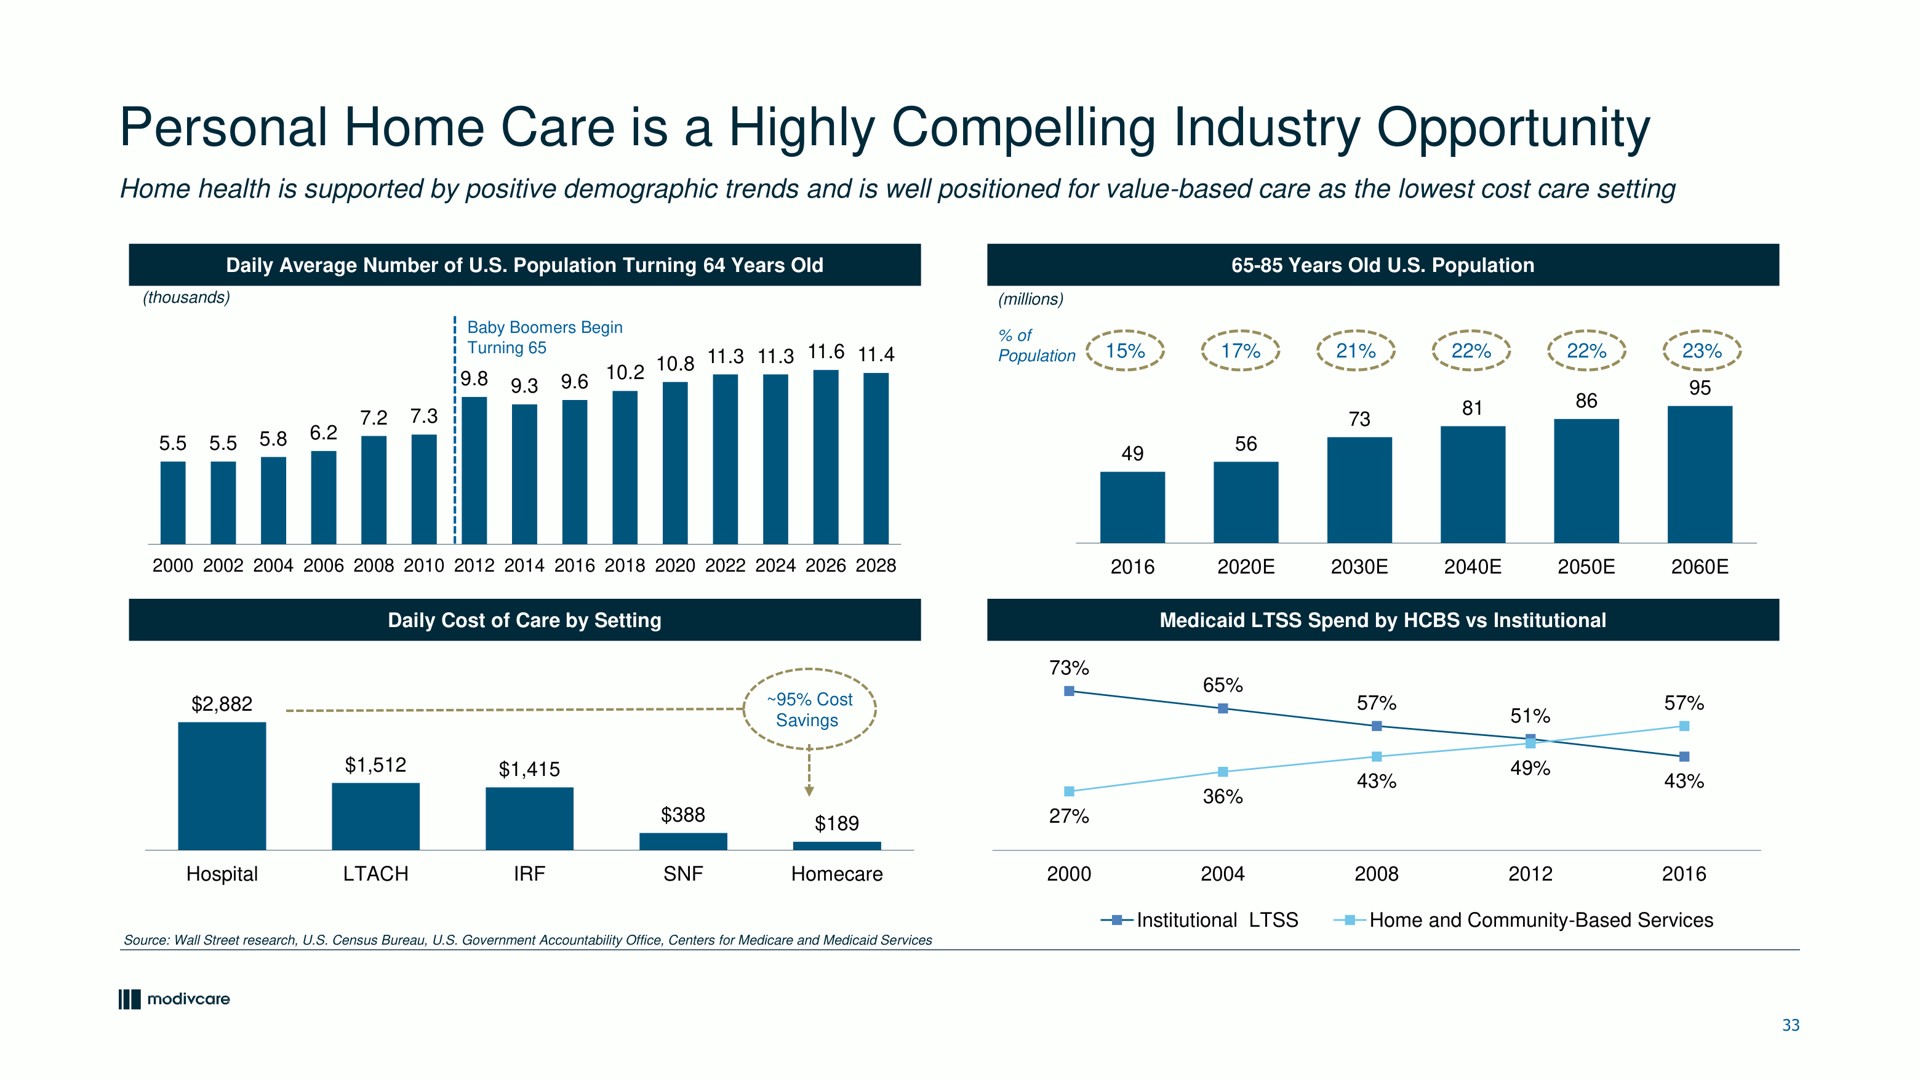 personal home care is a highly compelling industry opportunity | ModivCare